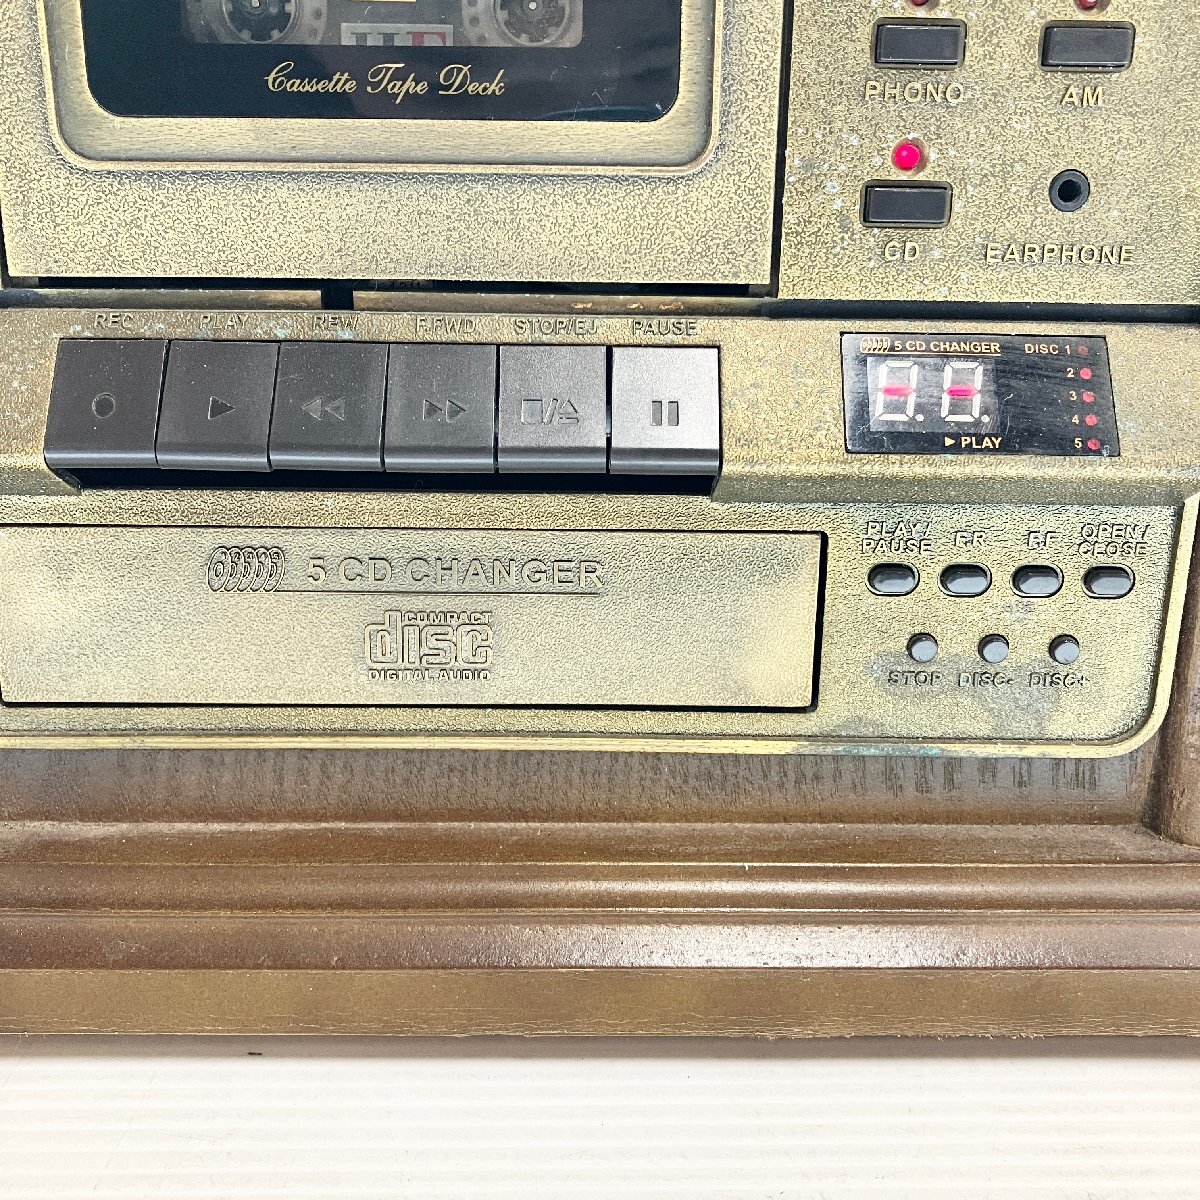 0[ junk ] Hill top E-6131 record *CD player antique style present condition goods ff ()K/60516/2/11.5